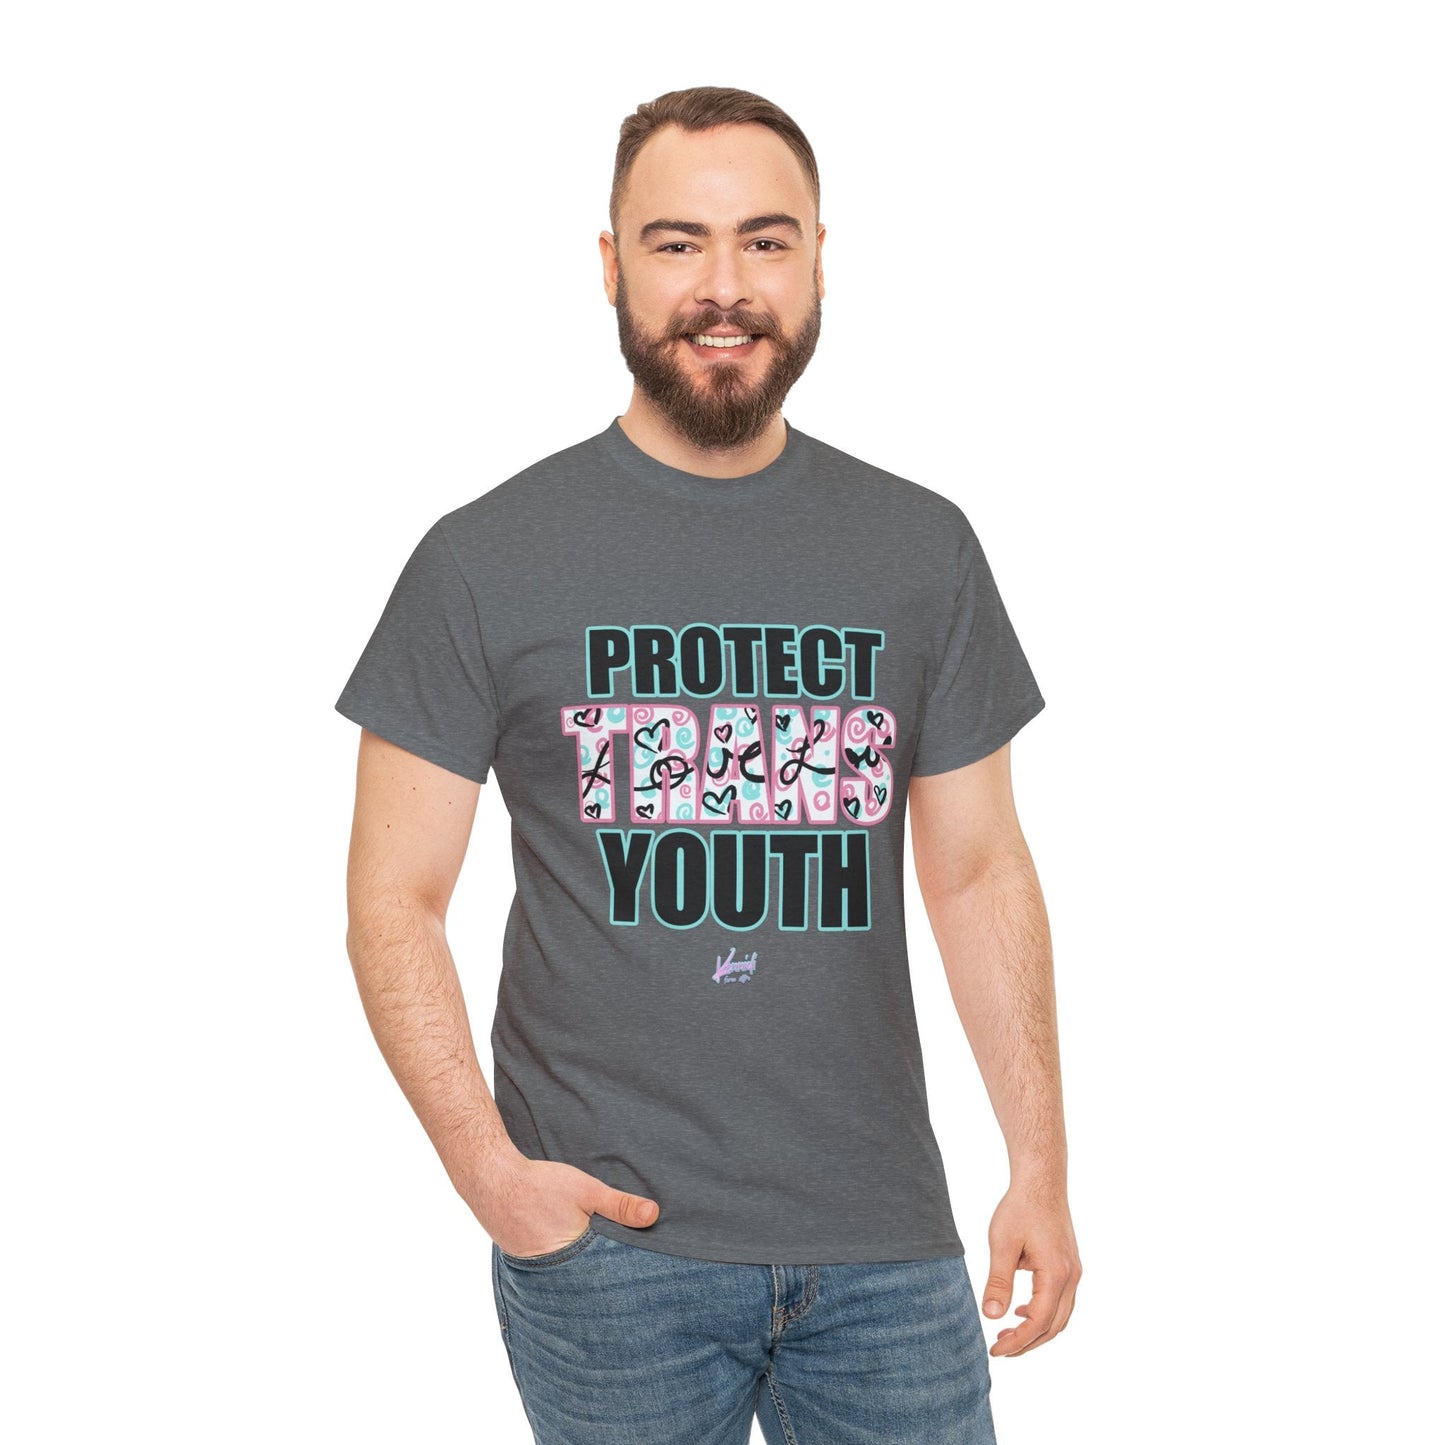 Protect Trans Youth Love 3.0 Unisex Heavy Cotton Tee - Graphite Heather / S T - Shirt